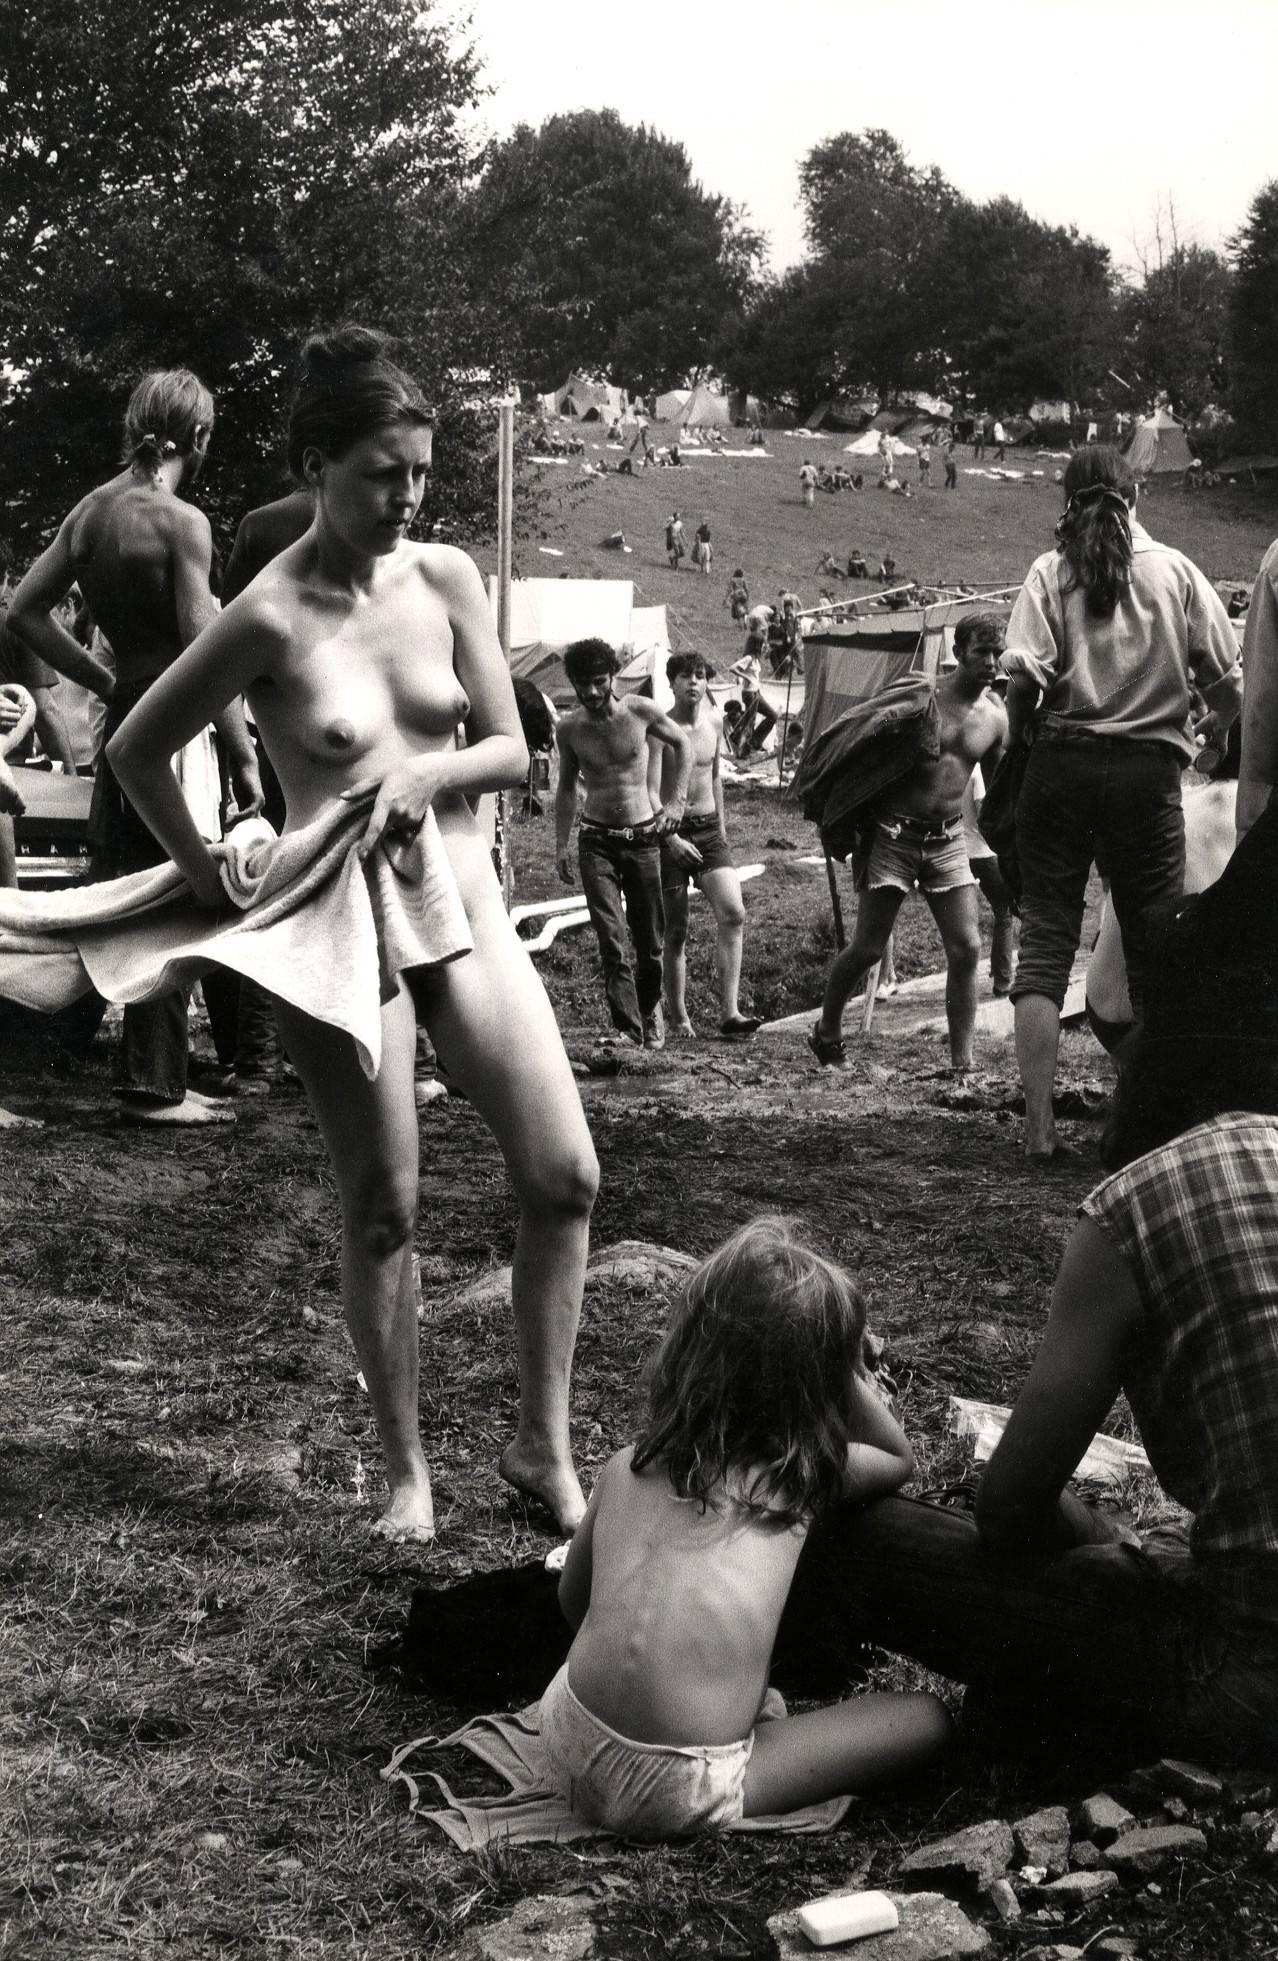 Burk Uzzle Black and White Photograph - Woodstock (child with nude woman)